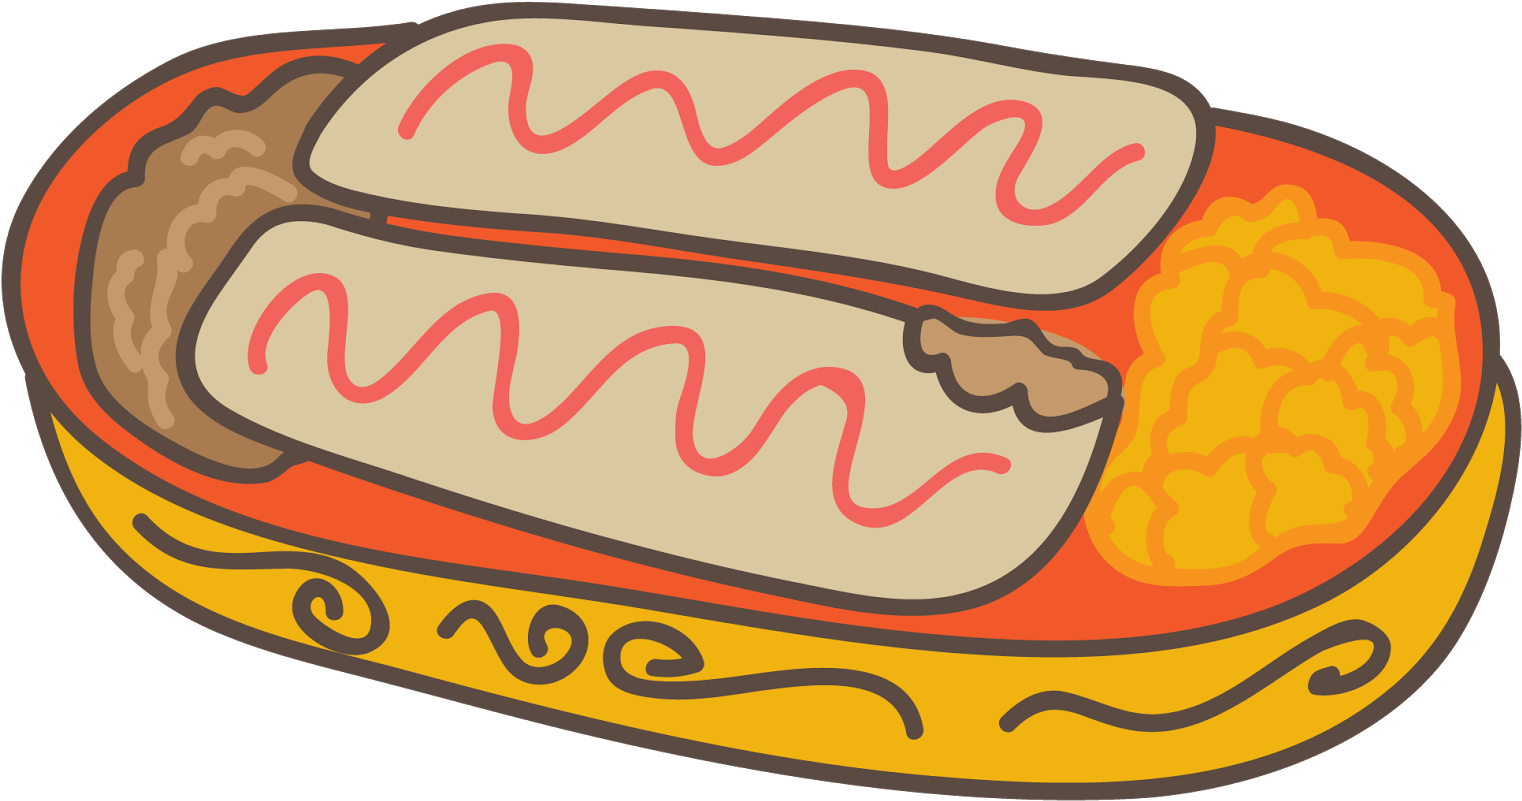 Mexican Food Plate Clip Art - Mexican Food Plate Clip Art (1600x882)